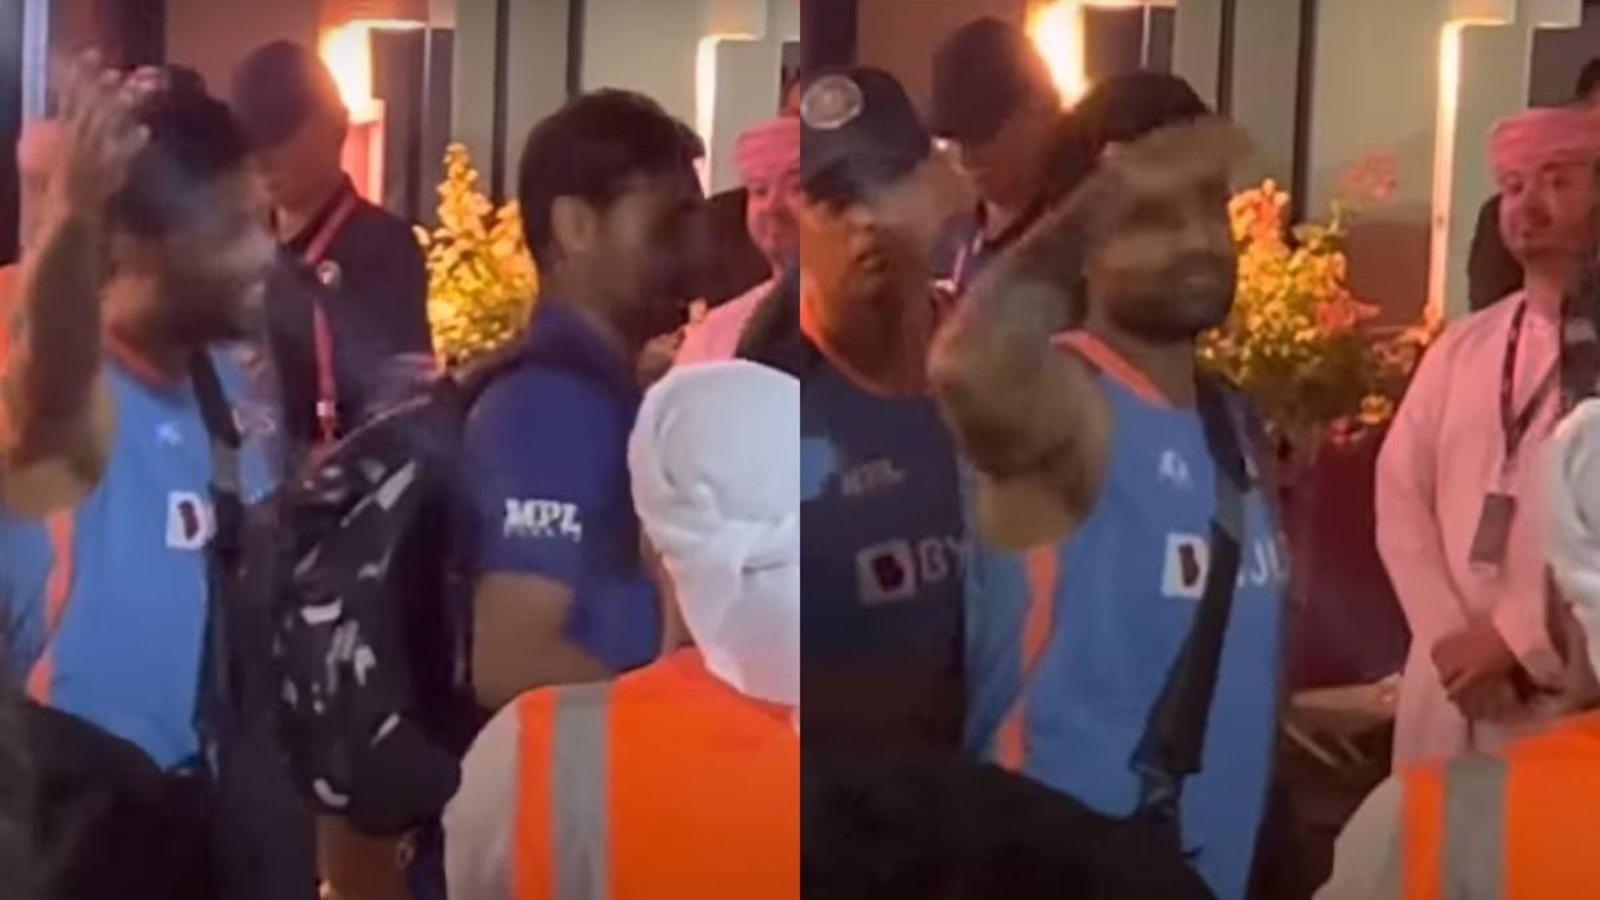 watch-bhuvneshwar-kumar-s-strange-reaction-to-fans-request-leaves-suryakumar-yadav-utterly-confused-after-asia-cup-tie